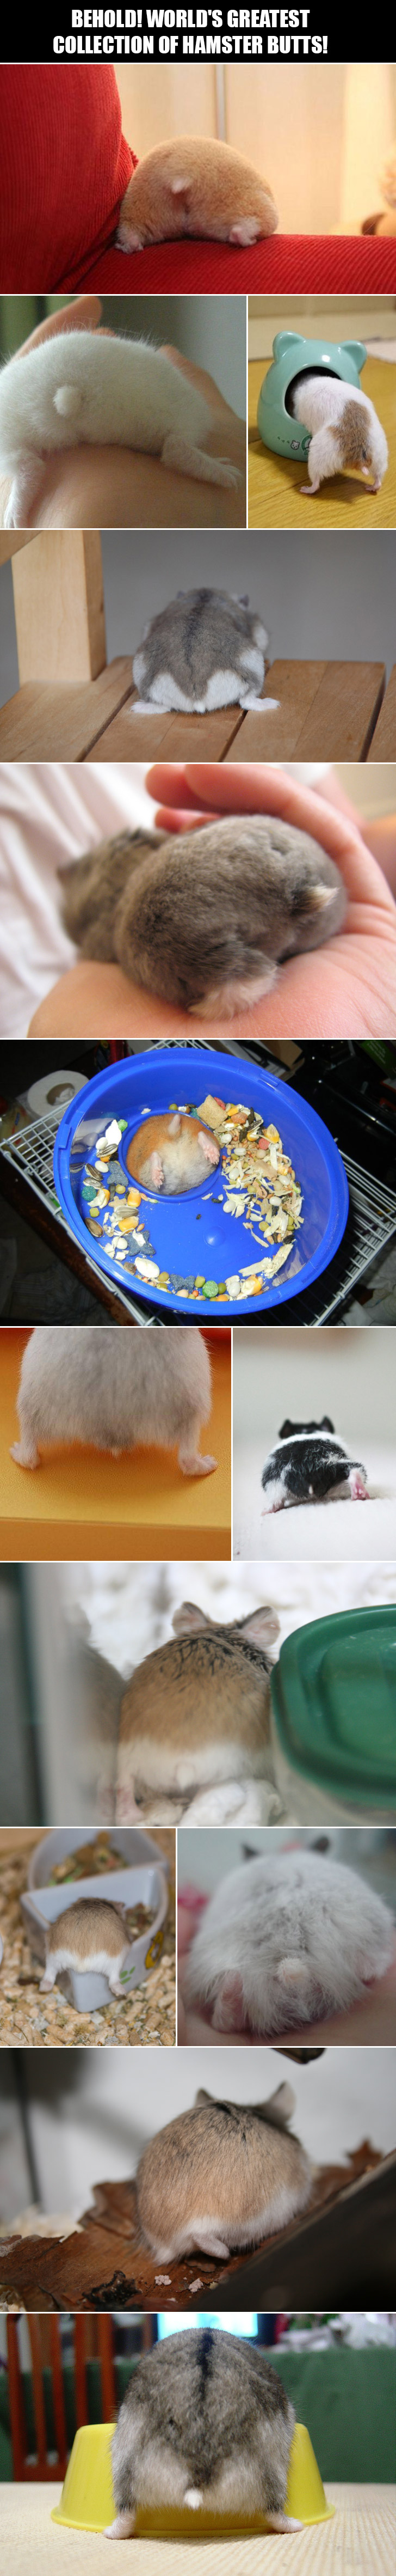 A lovely collection of hamster butts.